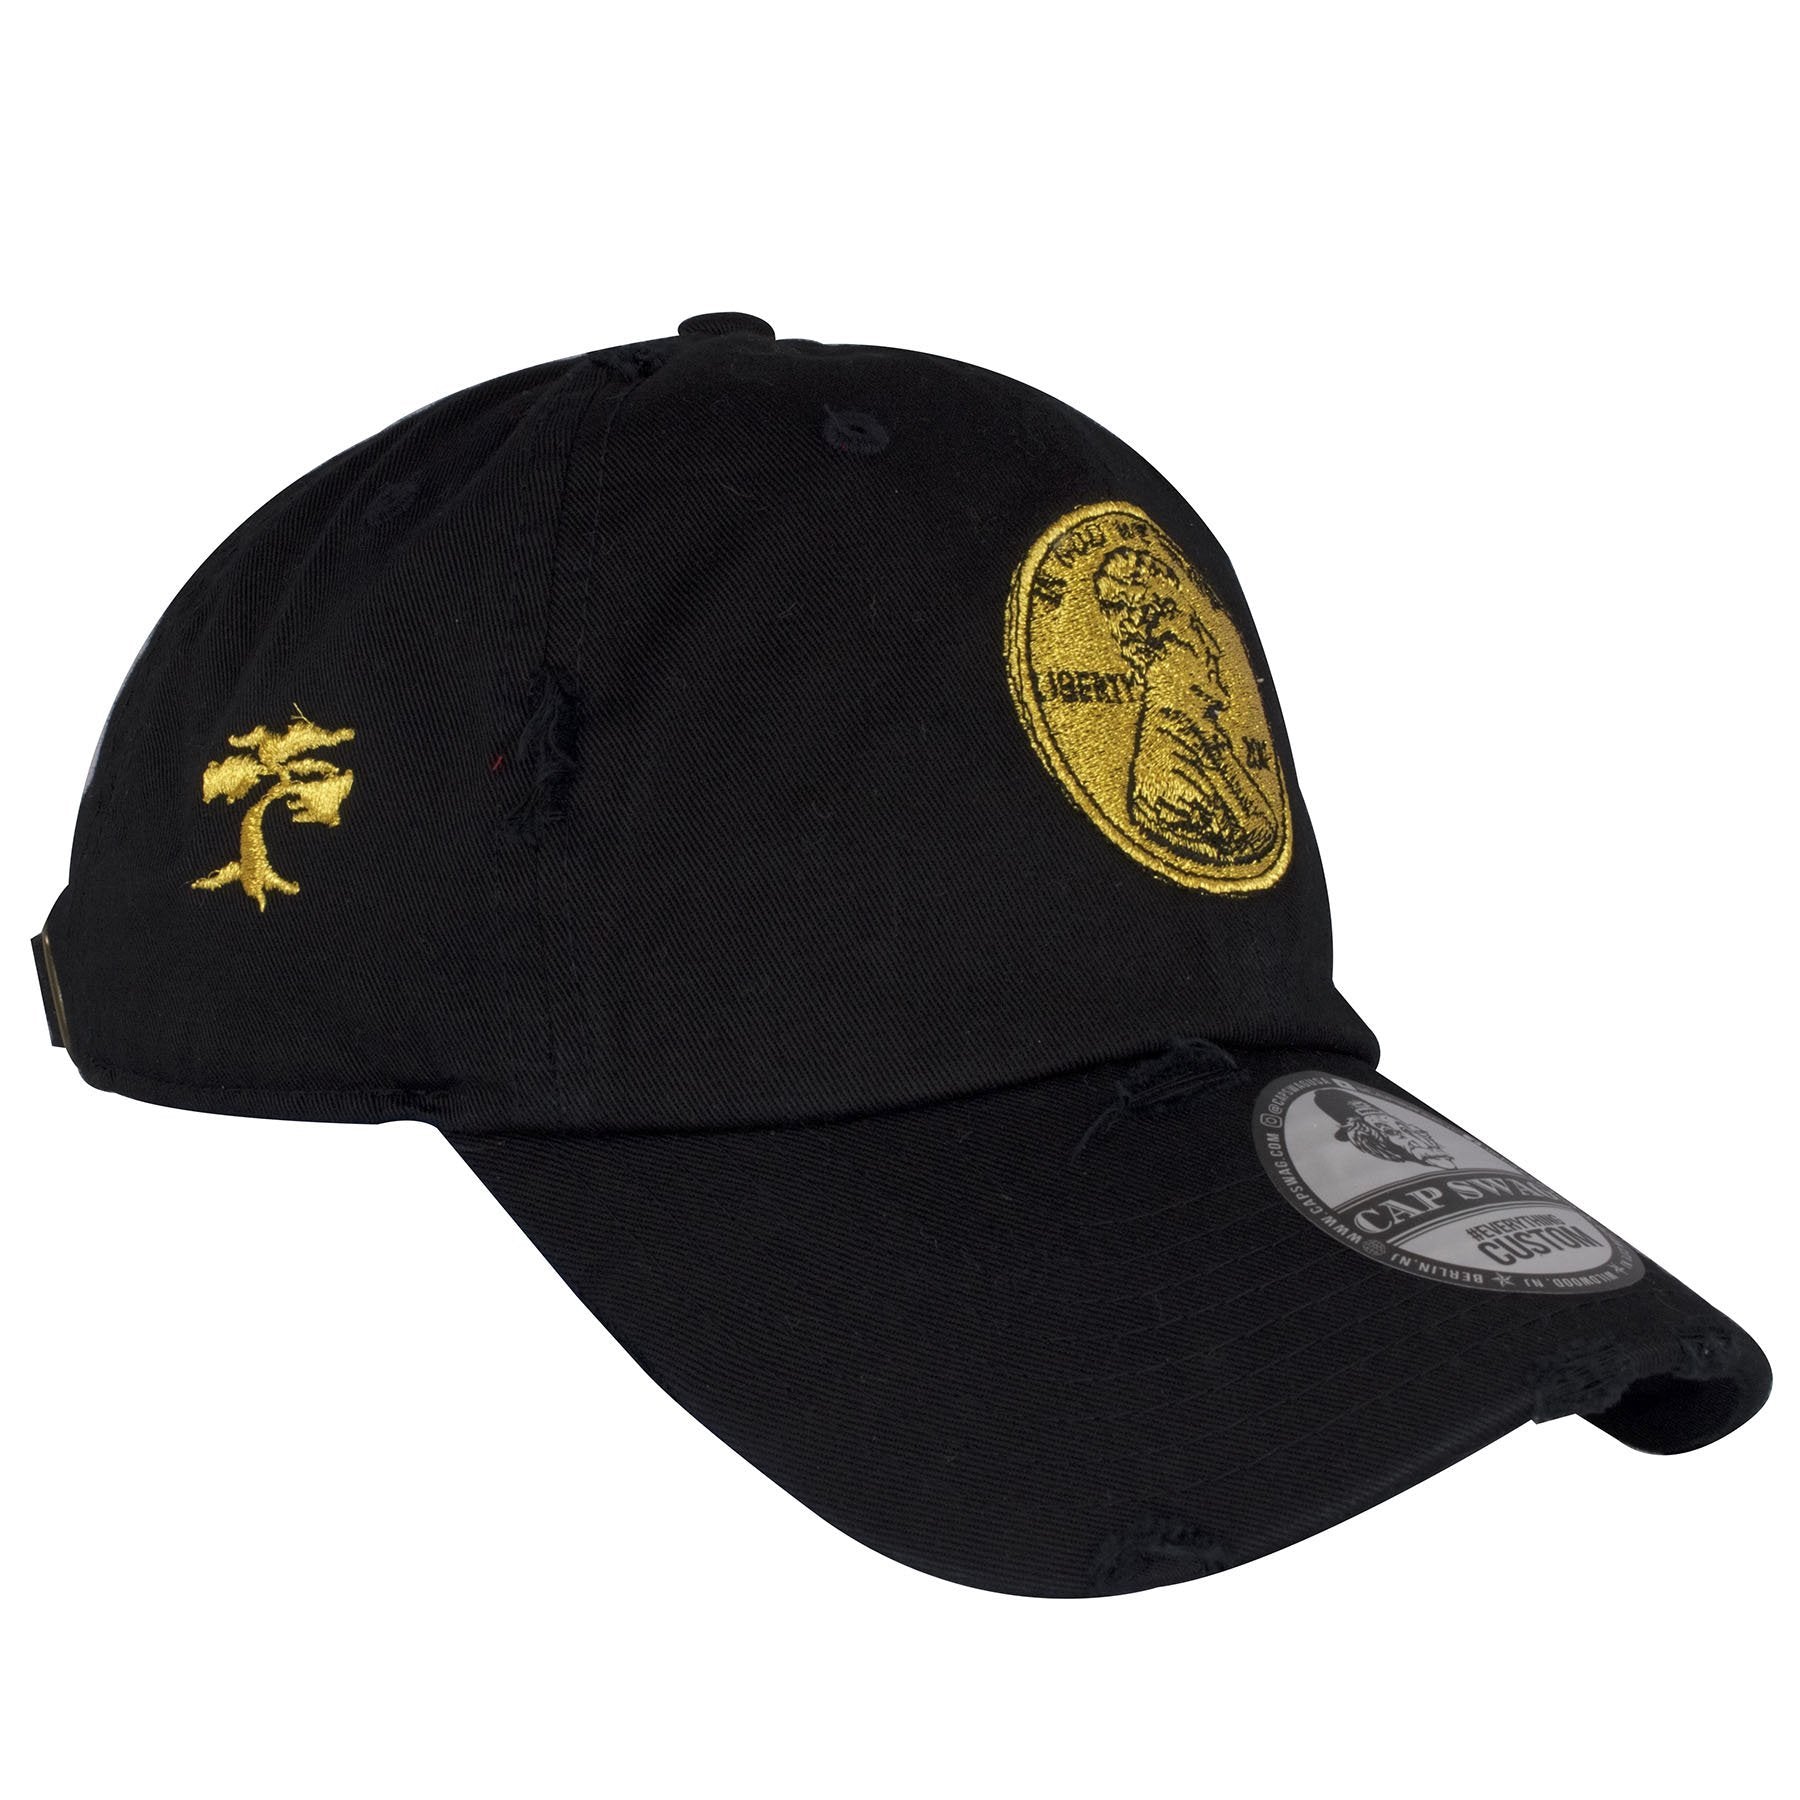 on the right side of the gold metallic foamposite sneaker matching distressed dad hat is a gold foot clan bonsai tree